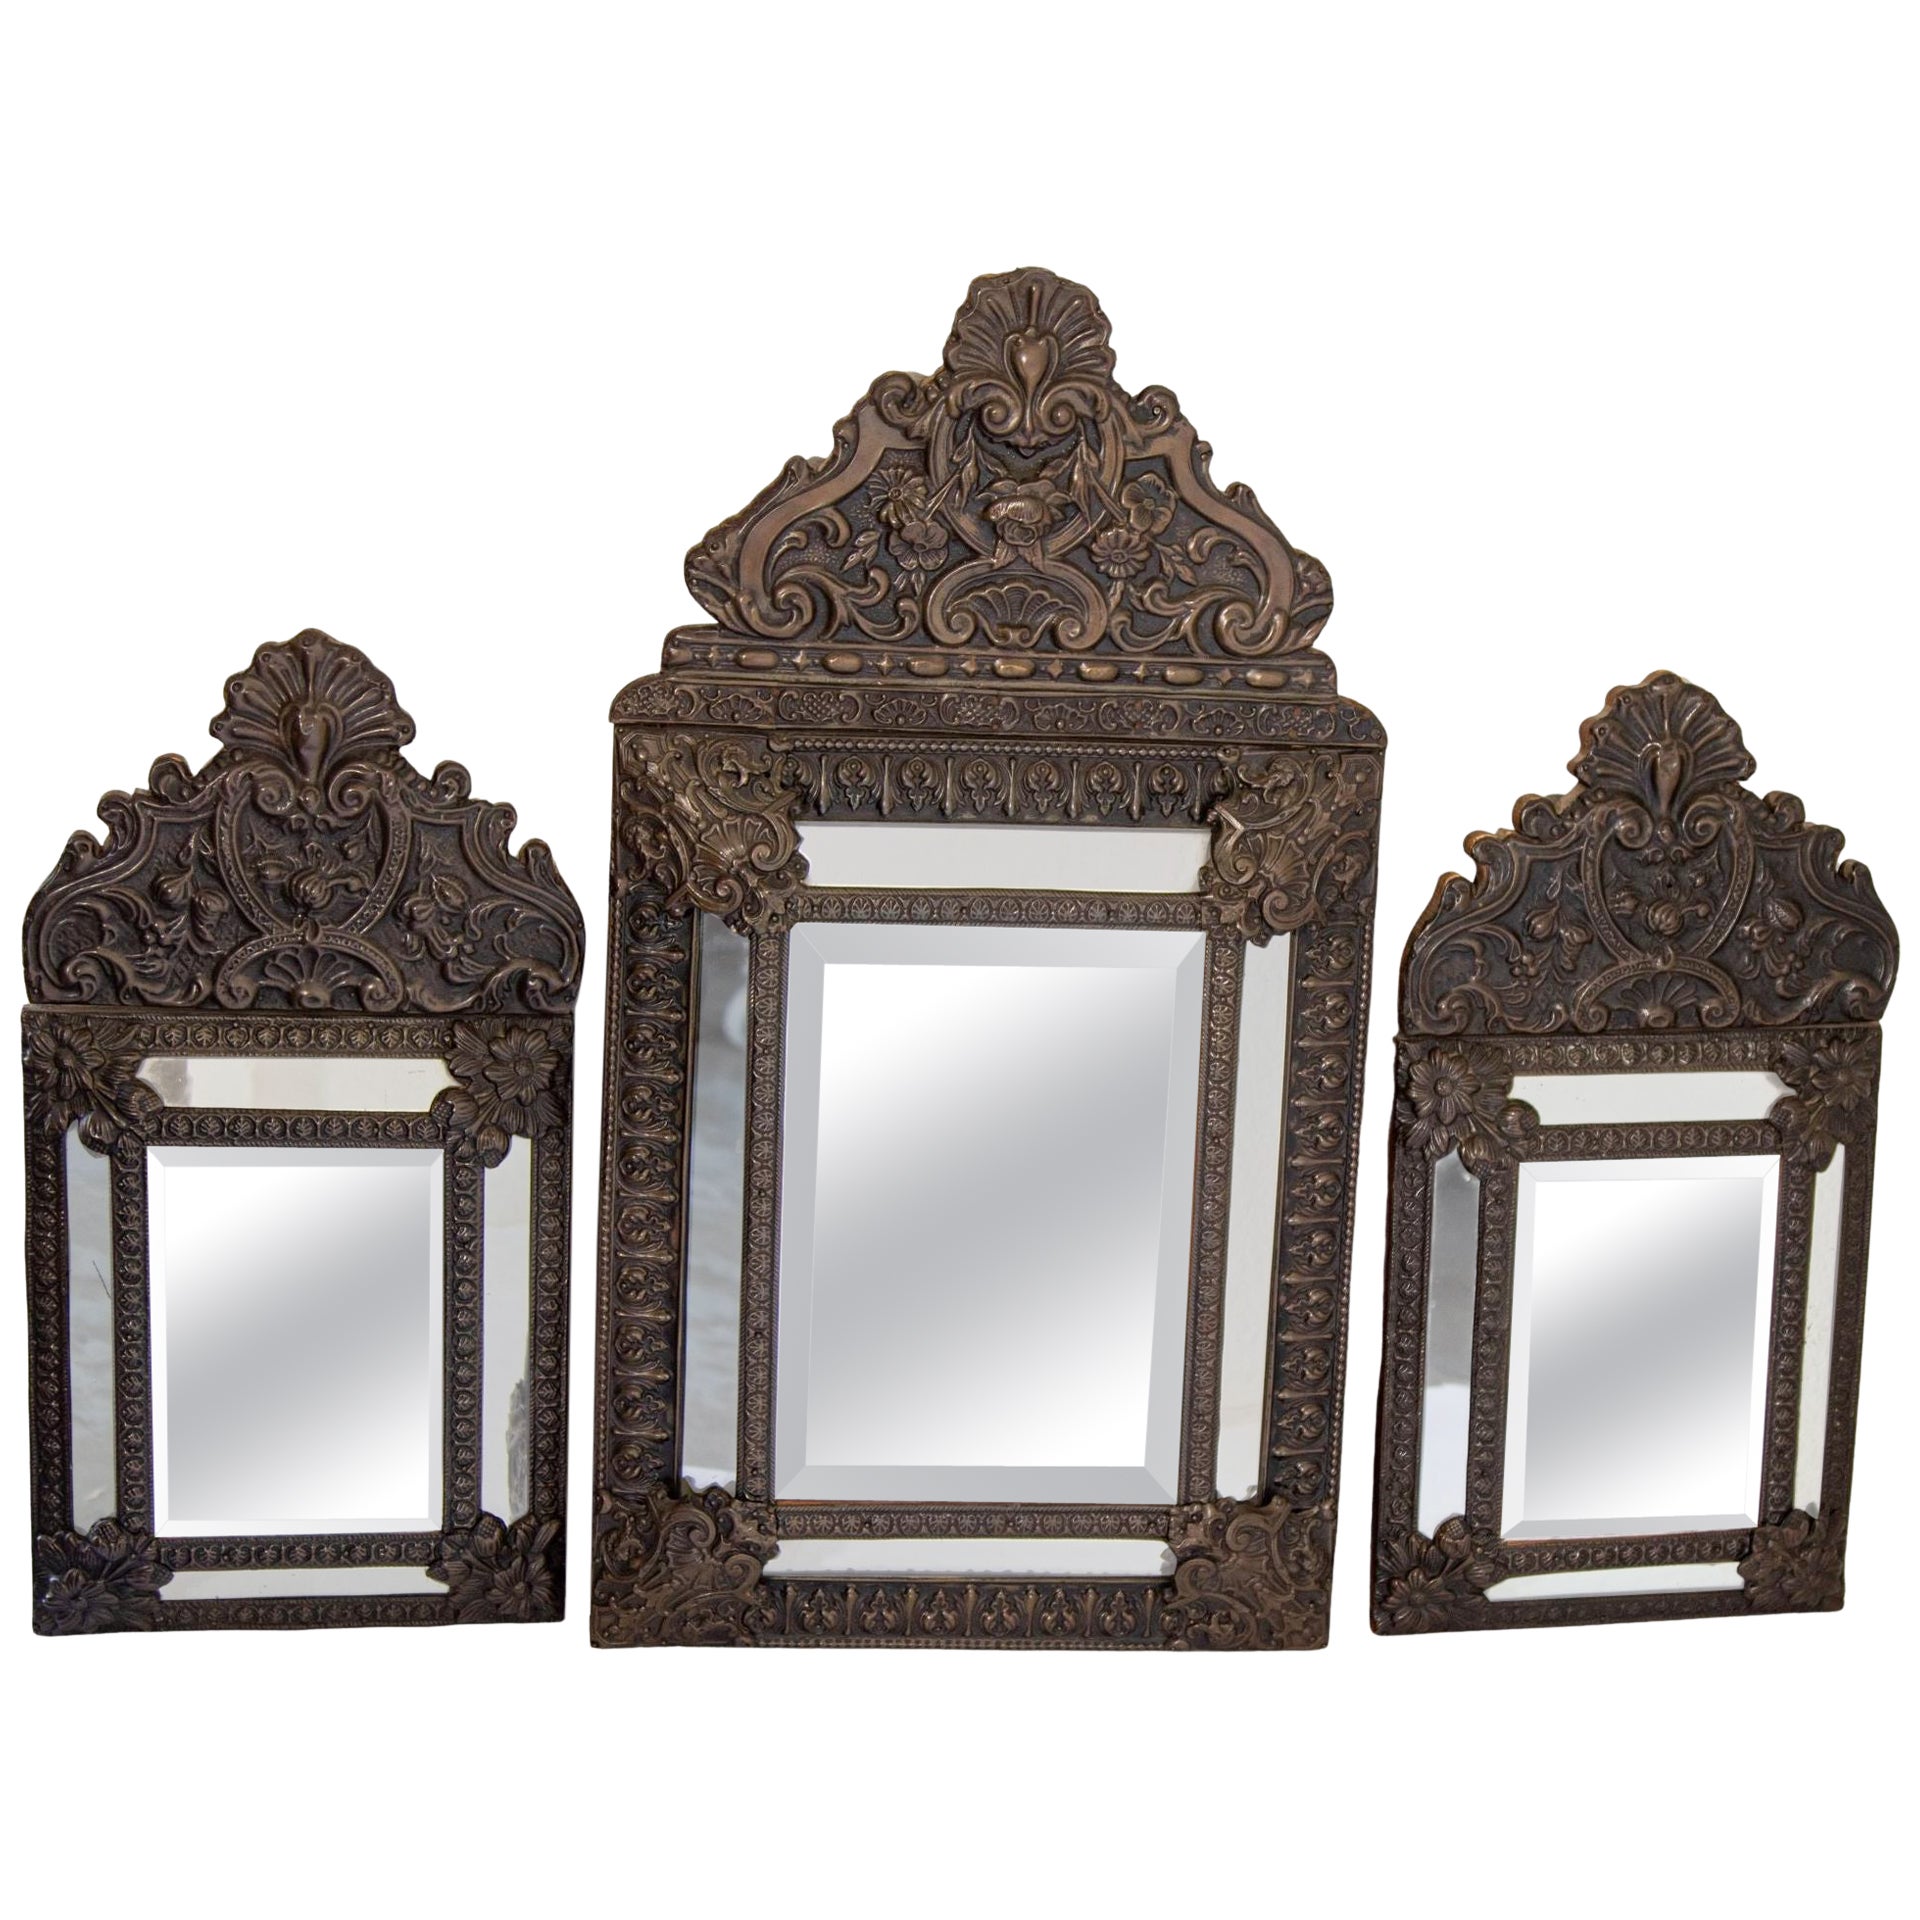 19th Century French Antique Napoleon III Repousse Metal Wall Mirrors Set of 3 For Sale